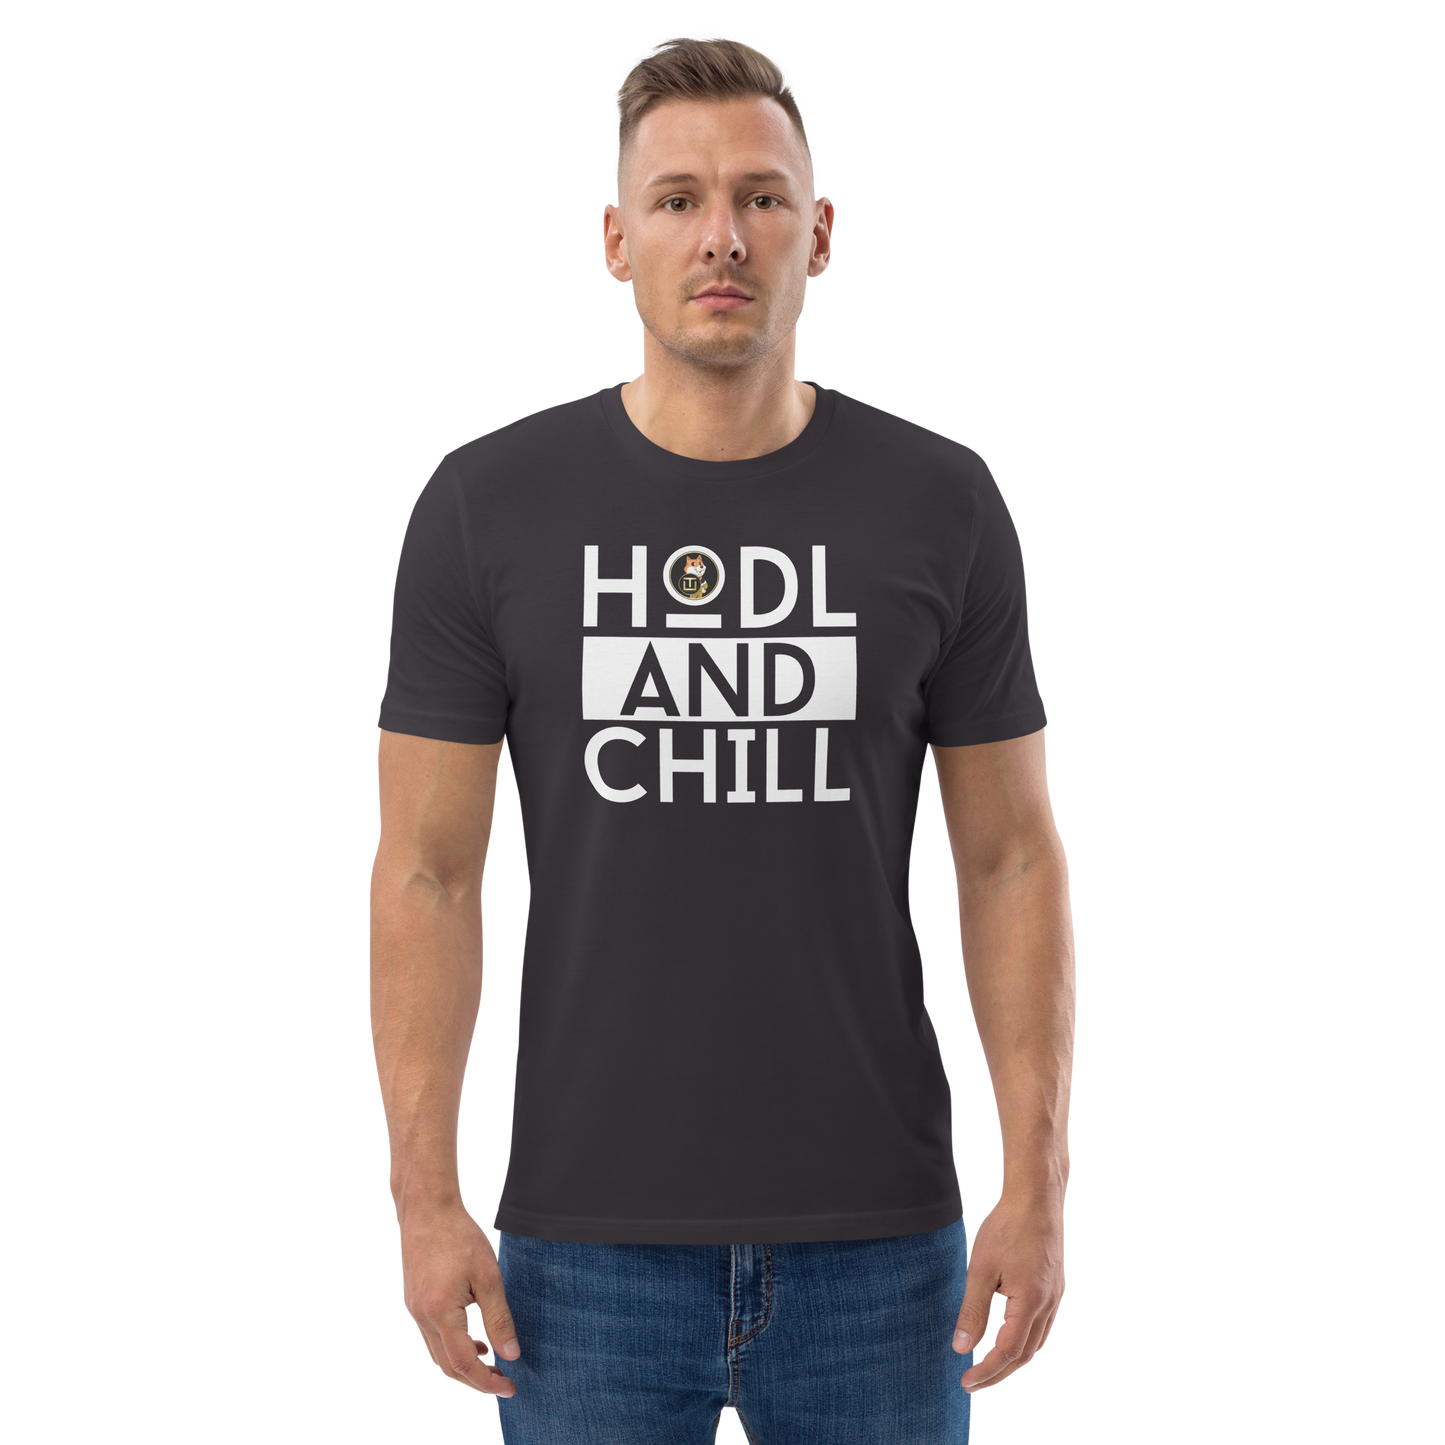 Son Of Doge 'Hodl And Chill' Men's organic cotton t-shirt